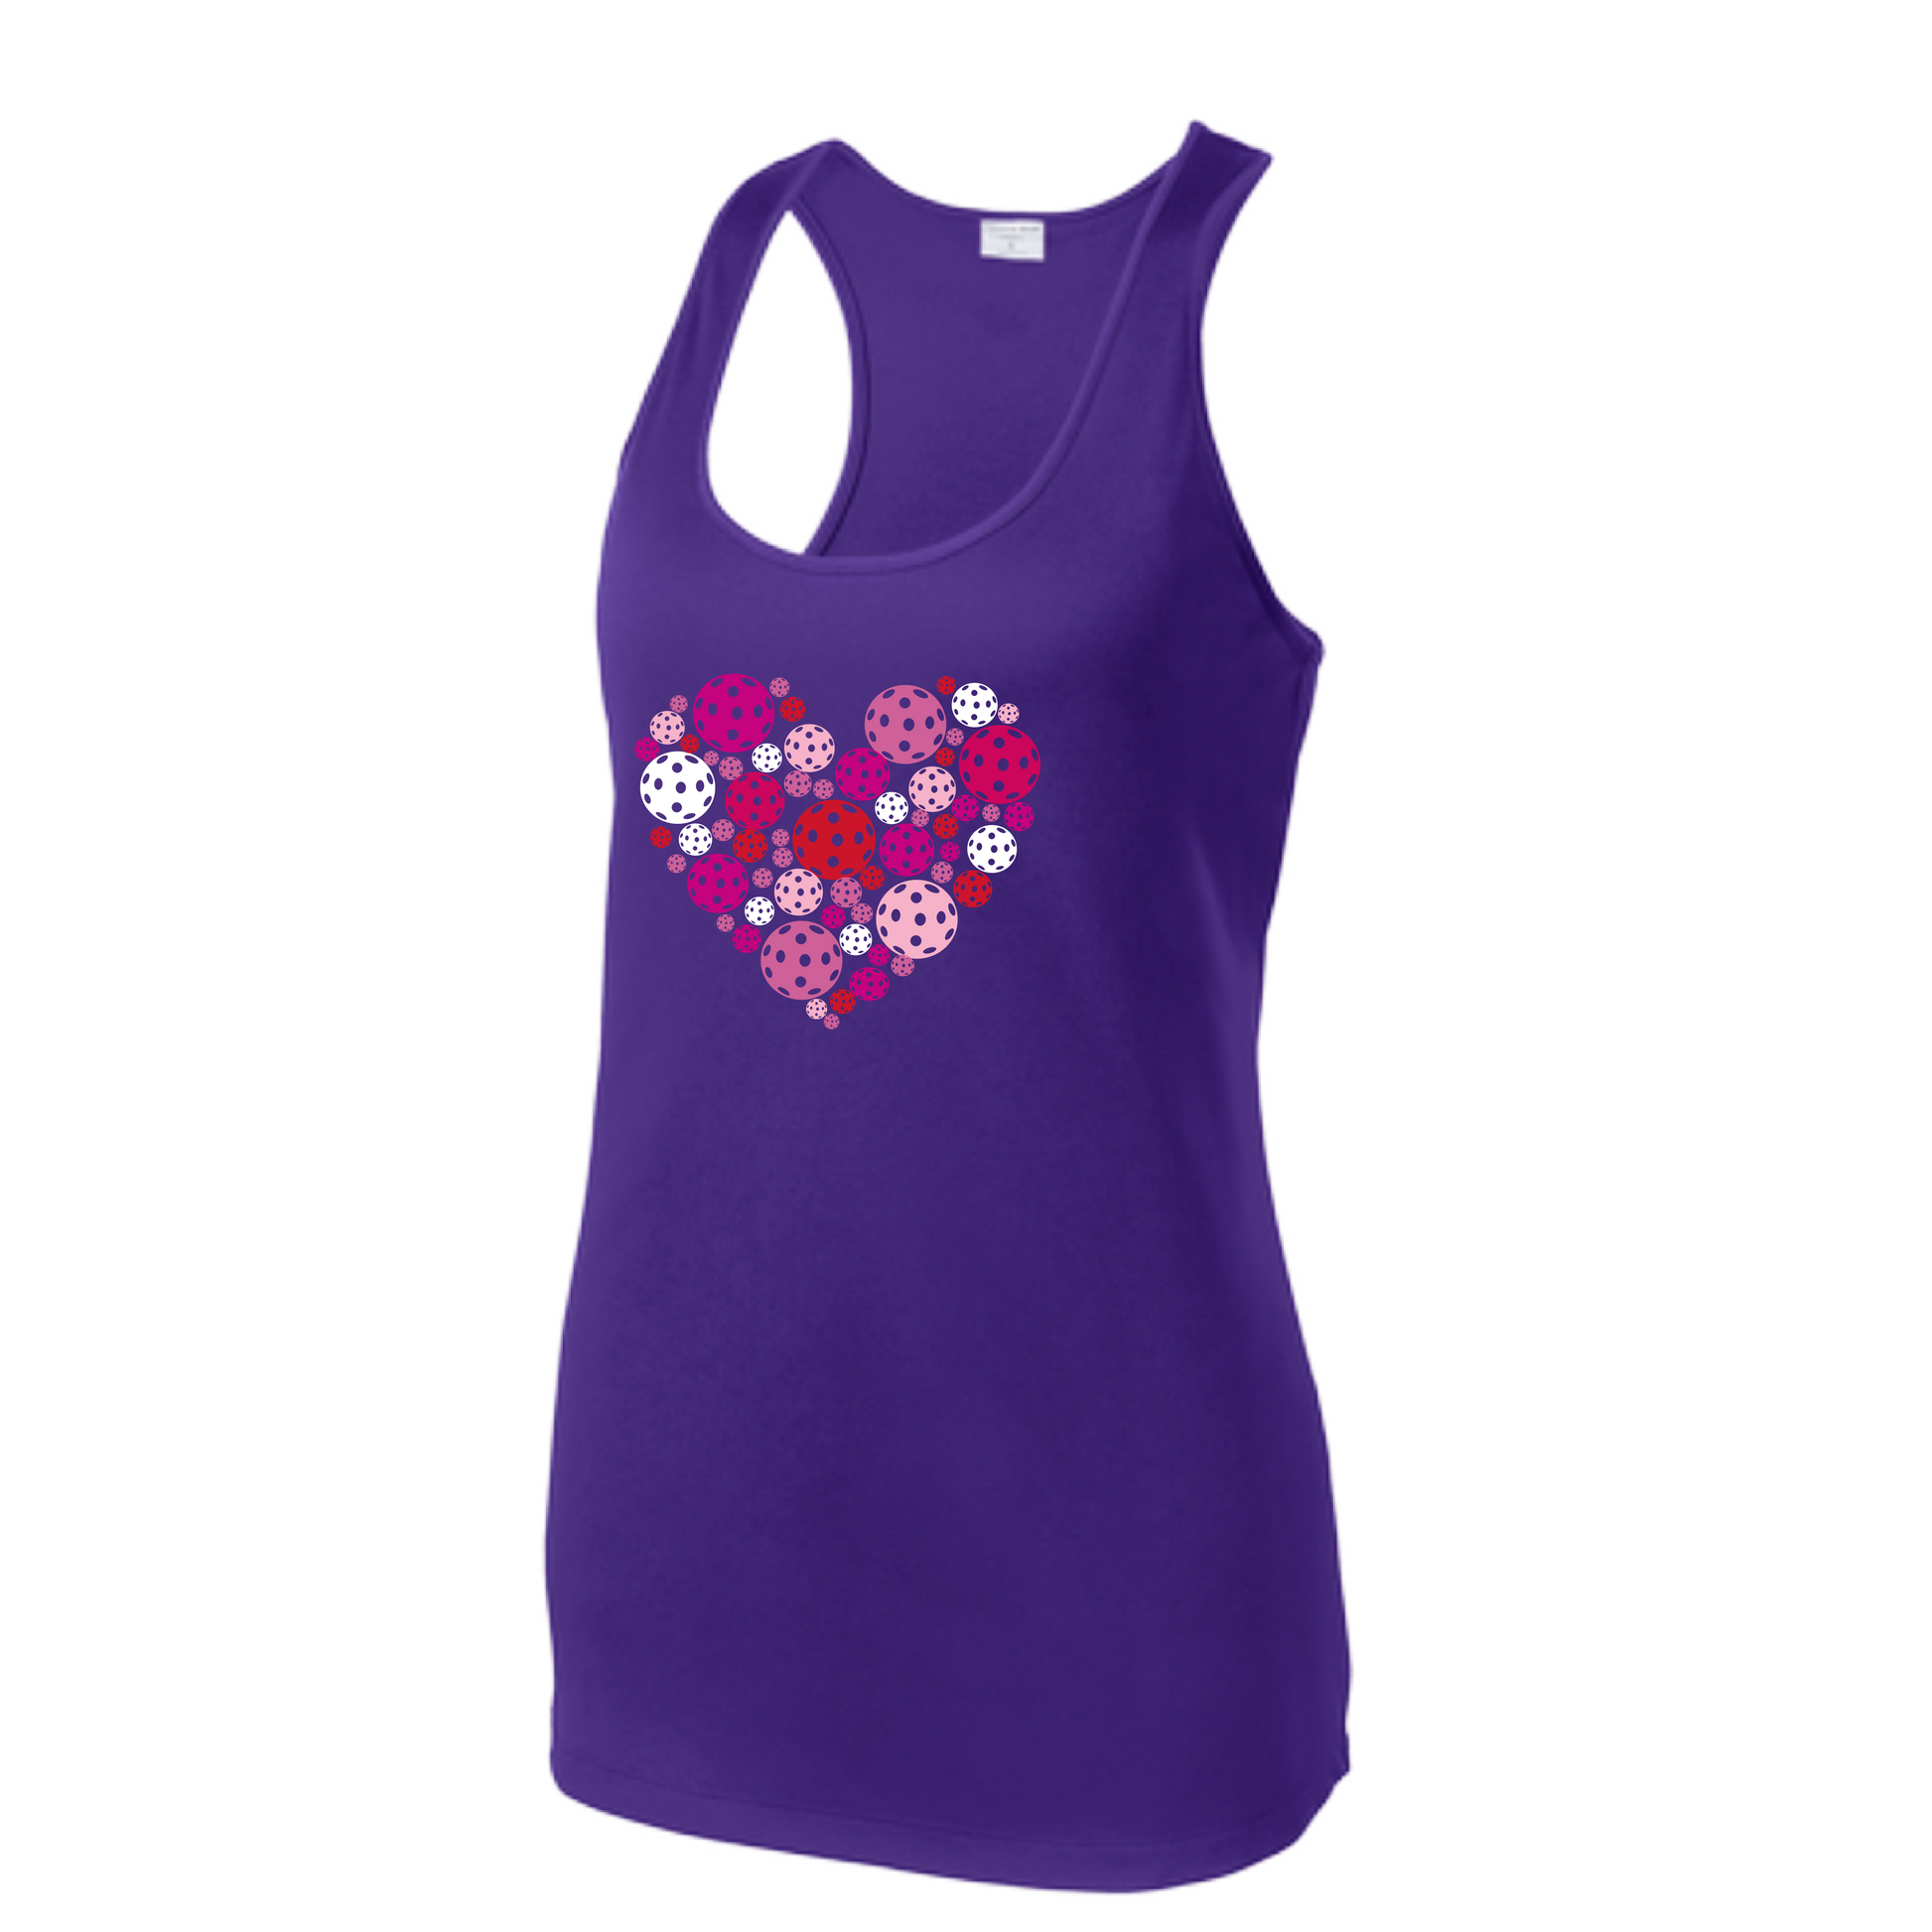   This Women's pickleball shirt packs a punch with its moisture-wicking properties, PosiCharge technology for color durability, and lightweight, ultra-soft tri-blend material. Enjoy optimal comfort and style.